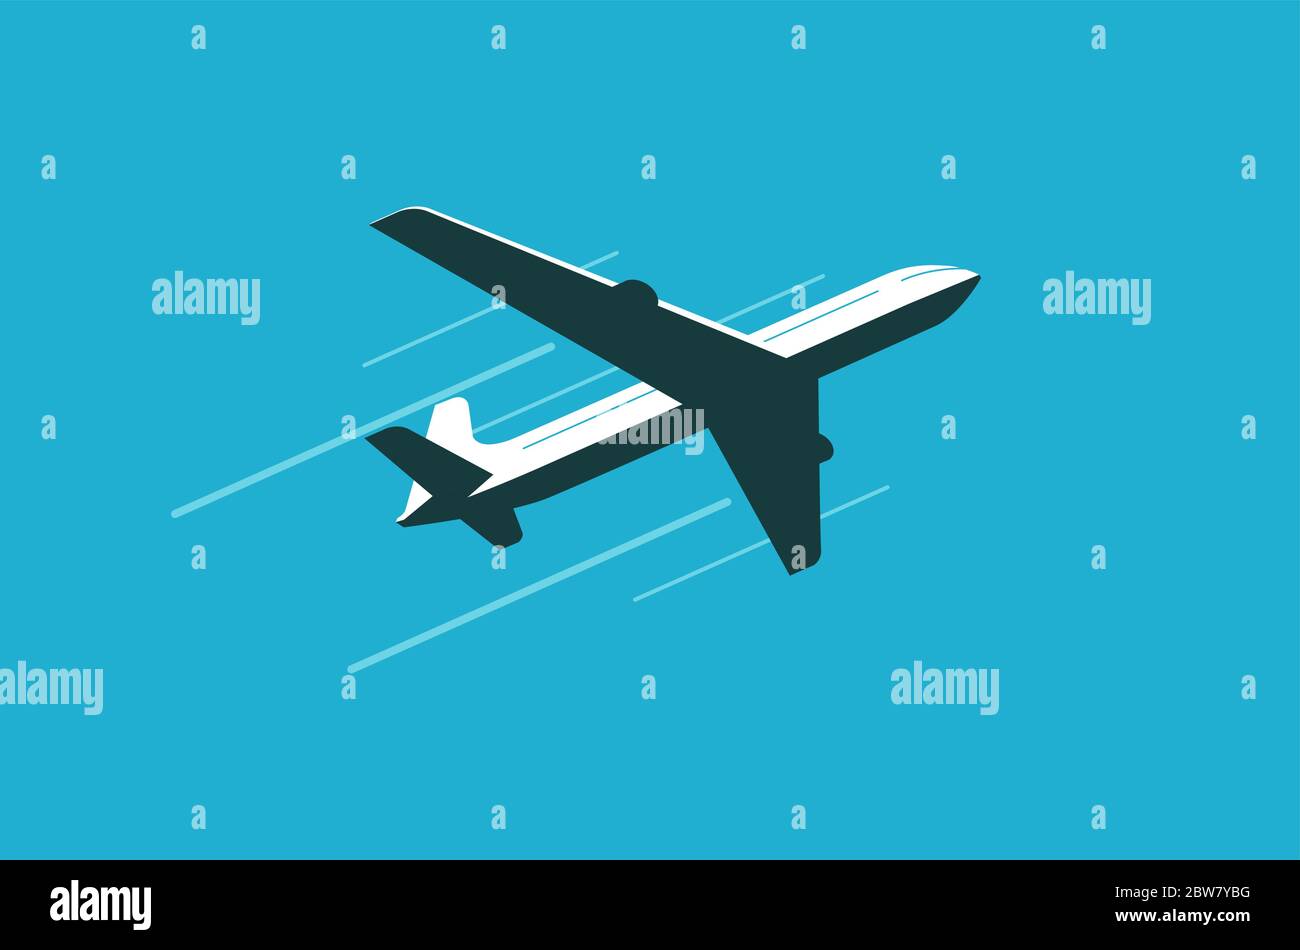 Flying plane in sky. Commercial airline, airplane vector illustration Stock Vector